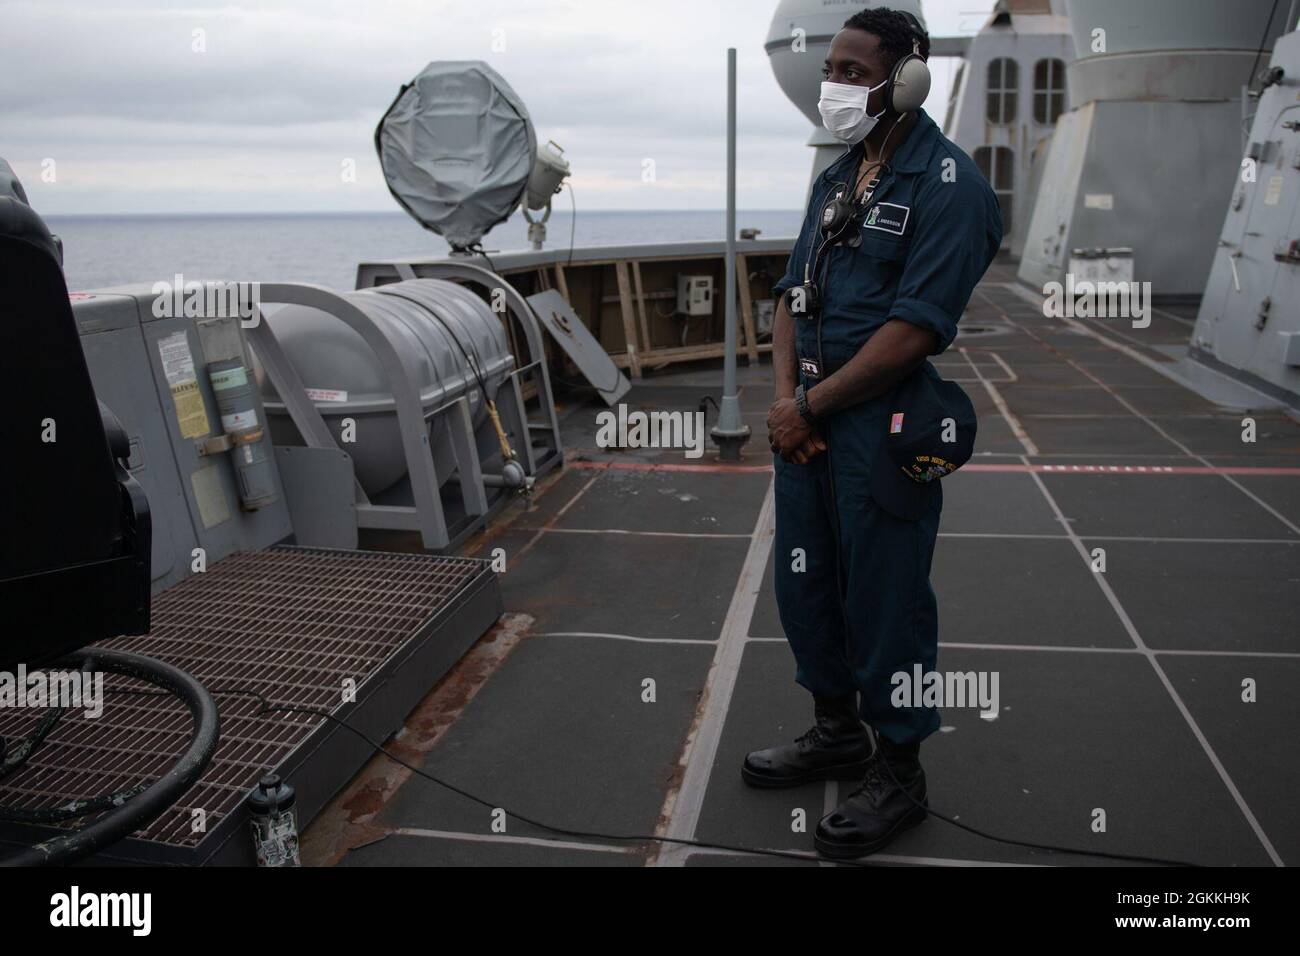 210517-N-XB010-1009 EAST CHINA SEA (May 17, 2021) Seaman Jordan Anderson, from Baton Rouge, La., stands starboard lookout watch on the USS New Orleans (LPD 18) starboard side bridge wing. New Orleans, part of the America Amphibious Ready Group, along with the 31st Marine Expeditionary Unit, is operating in the U.S. 7th Fleet area of responsibility to enhance interoperability with allies and partners and serve as a ready response force to defend peace and stability in the Indo-Pacific region. Stock Photo